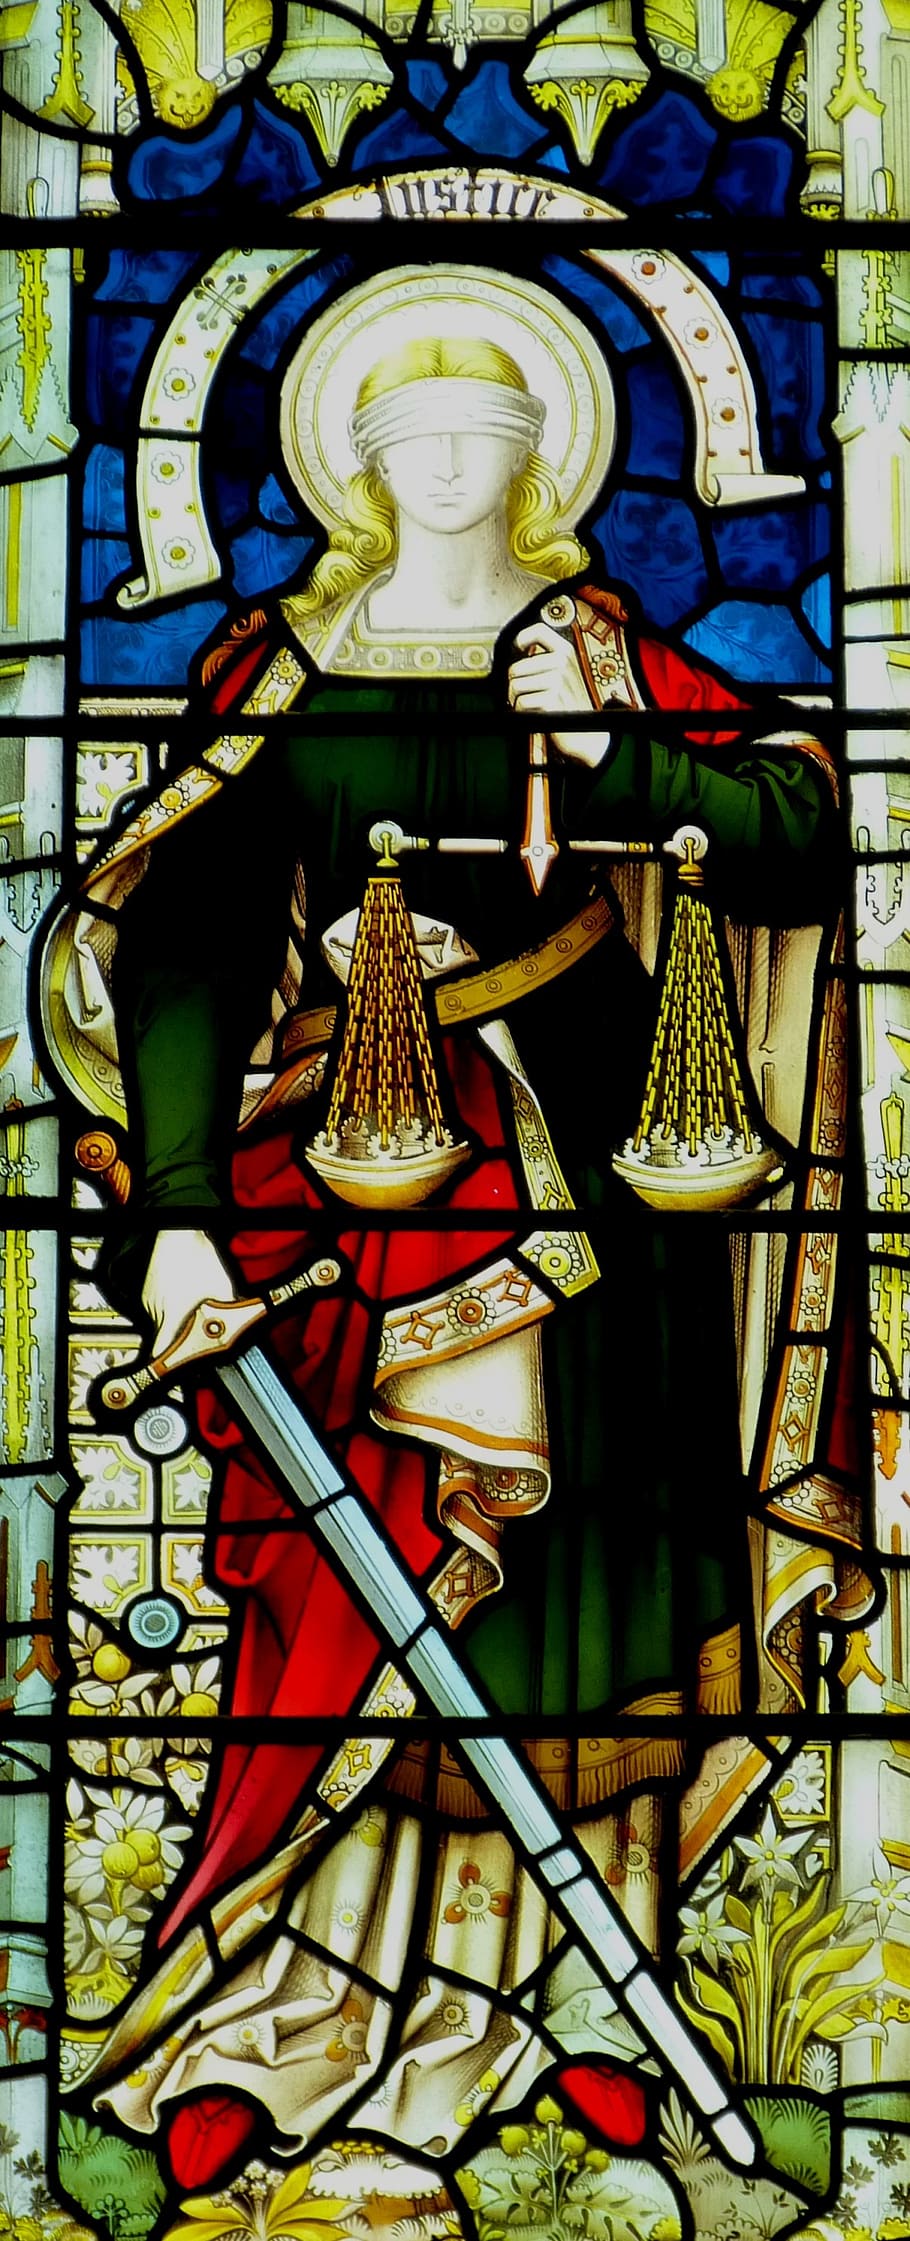 close-up photography, justice stein wall decor, church, church window, judgment, glass window, window, stained glass, christianity, faith